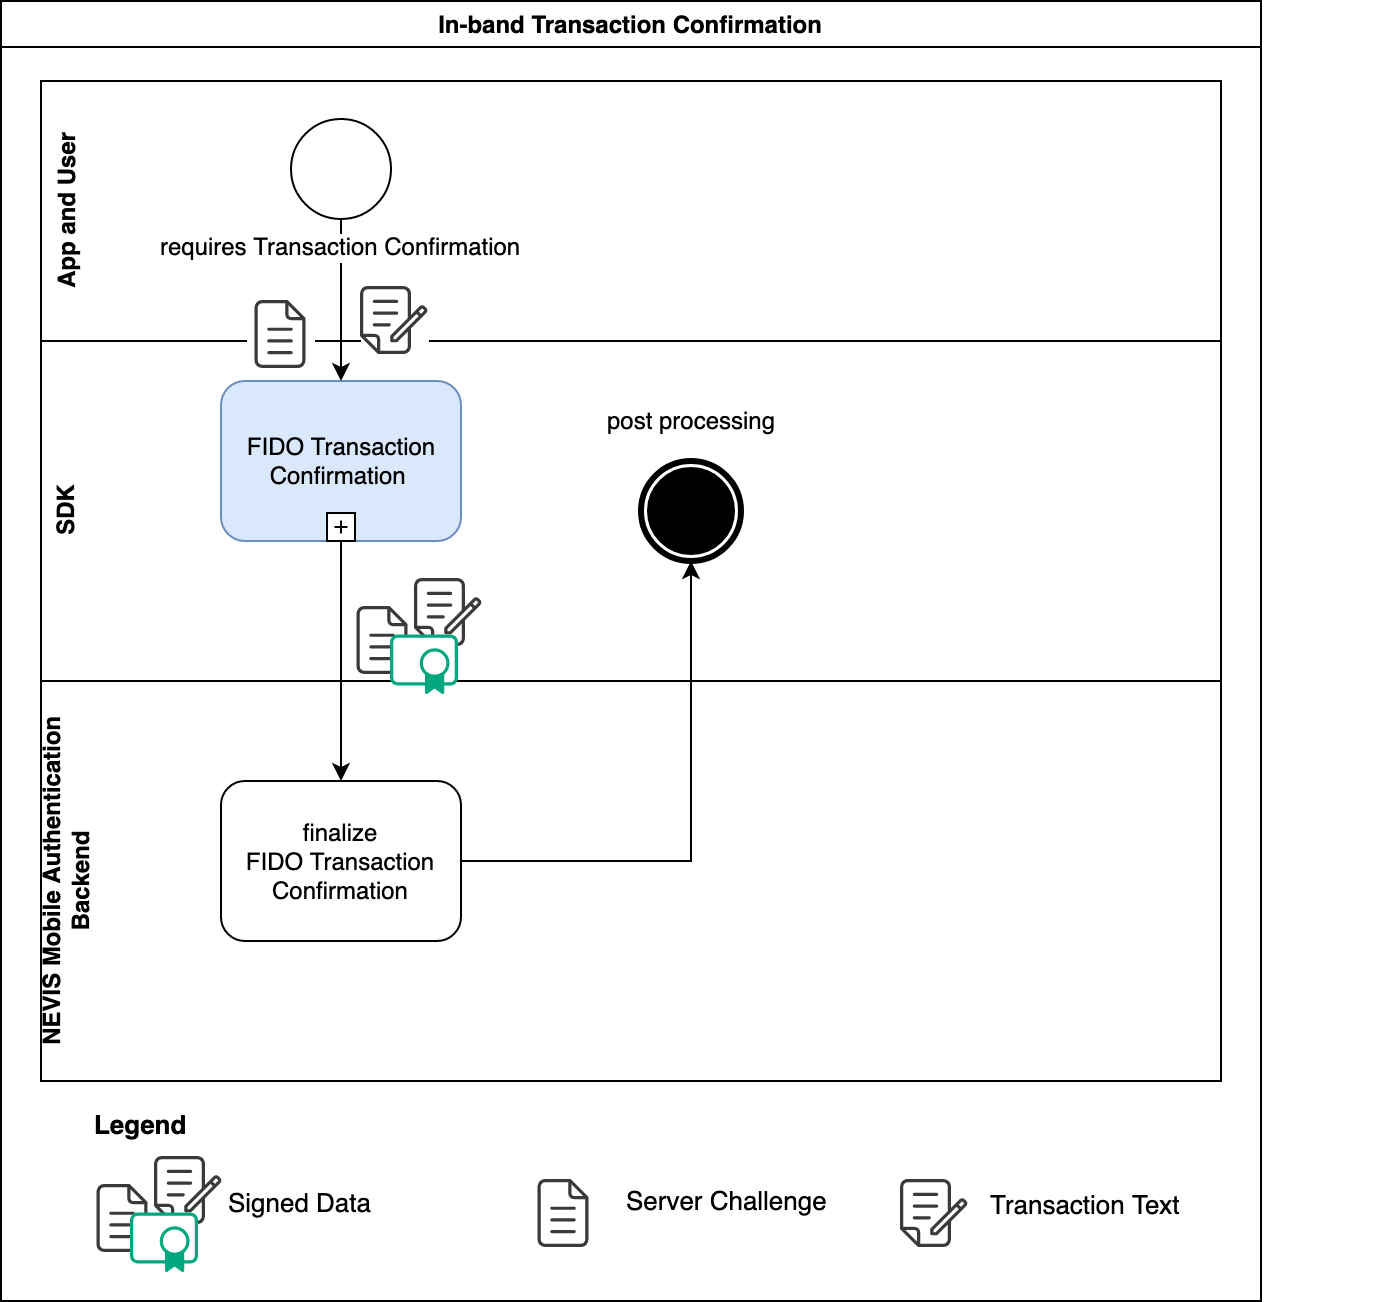 BPMN in-band transaction confirmation